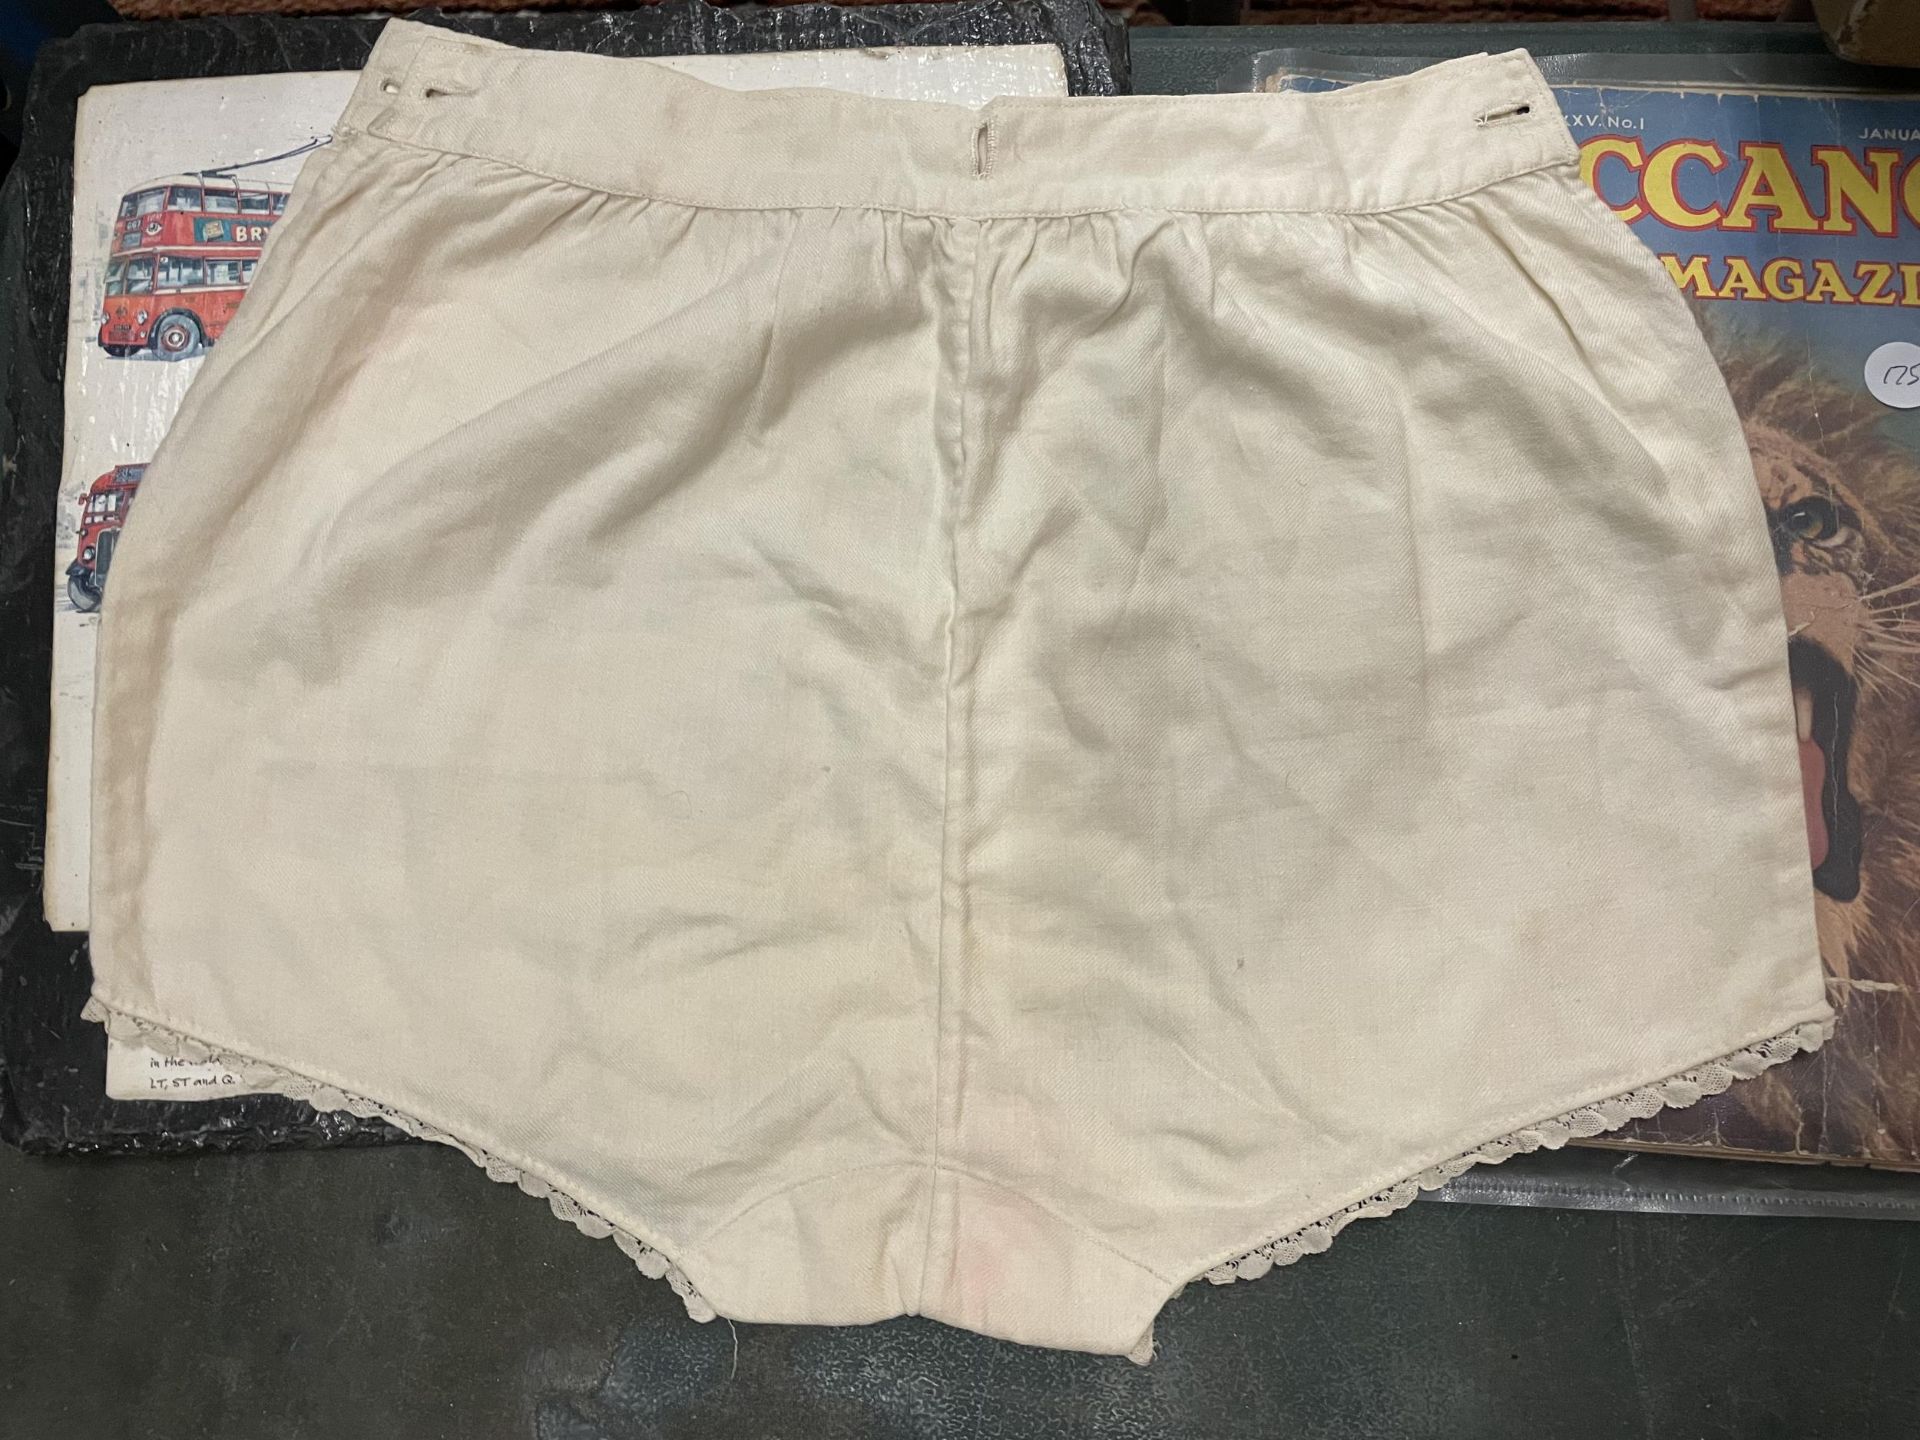 FOUR PAIRS OF VINTAGE LINGERIE SHORTS - Image 5 of 5